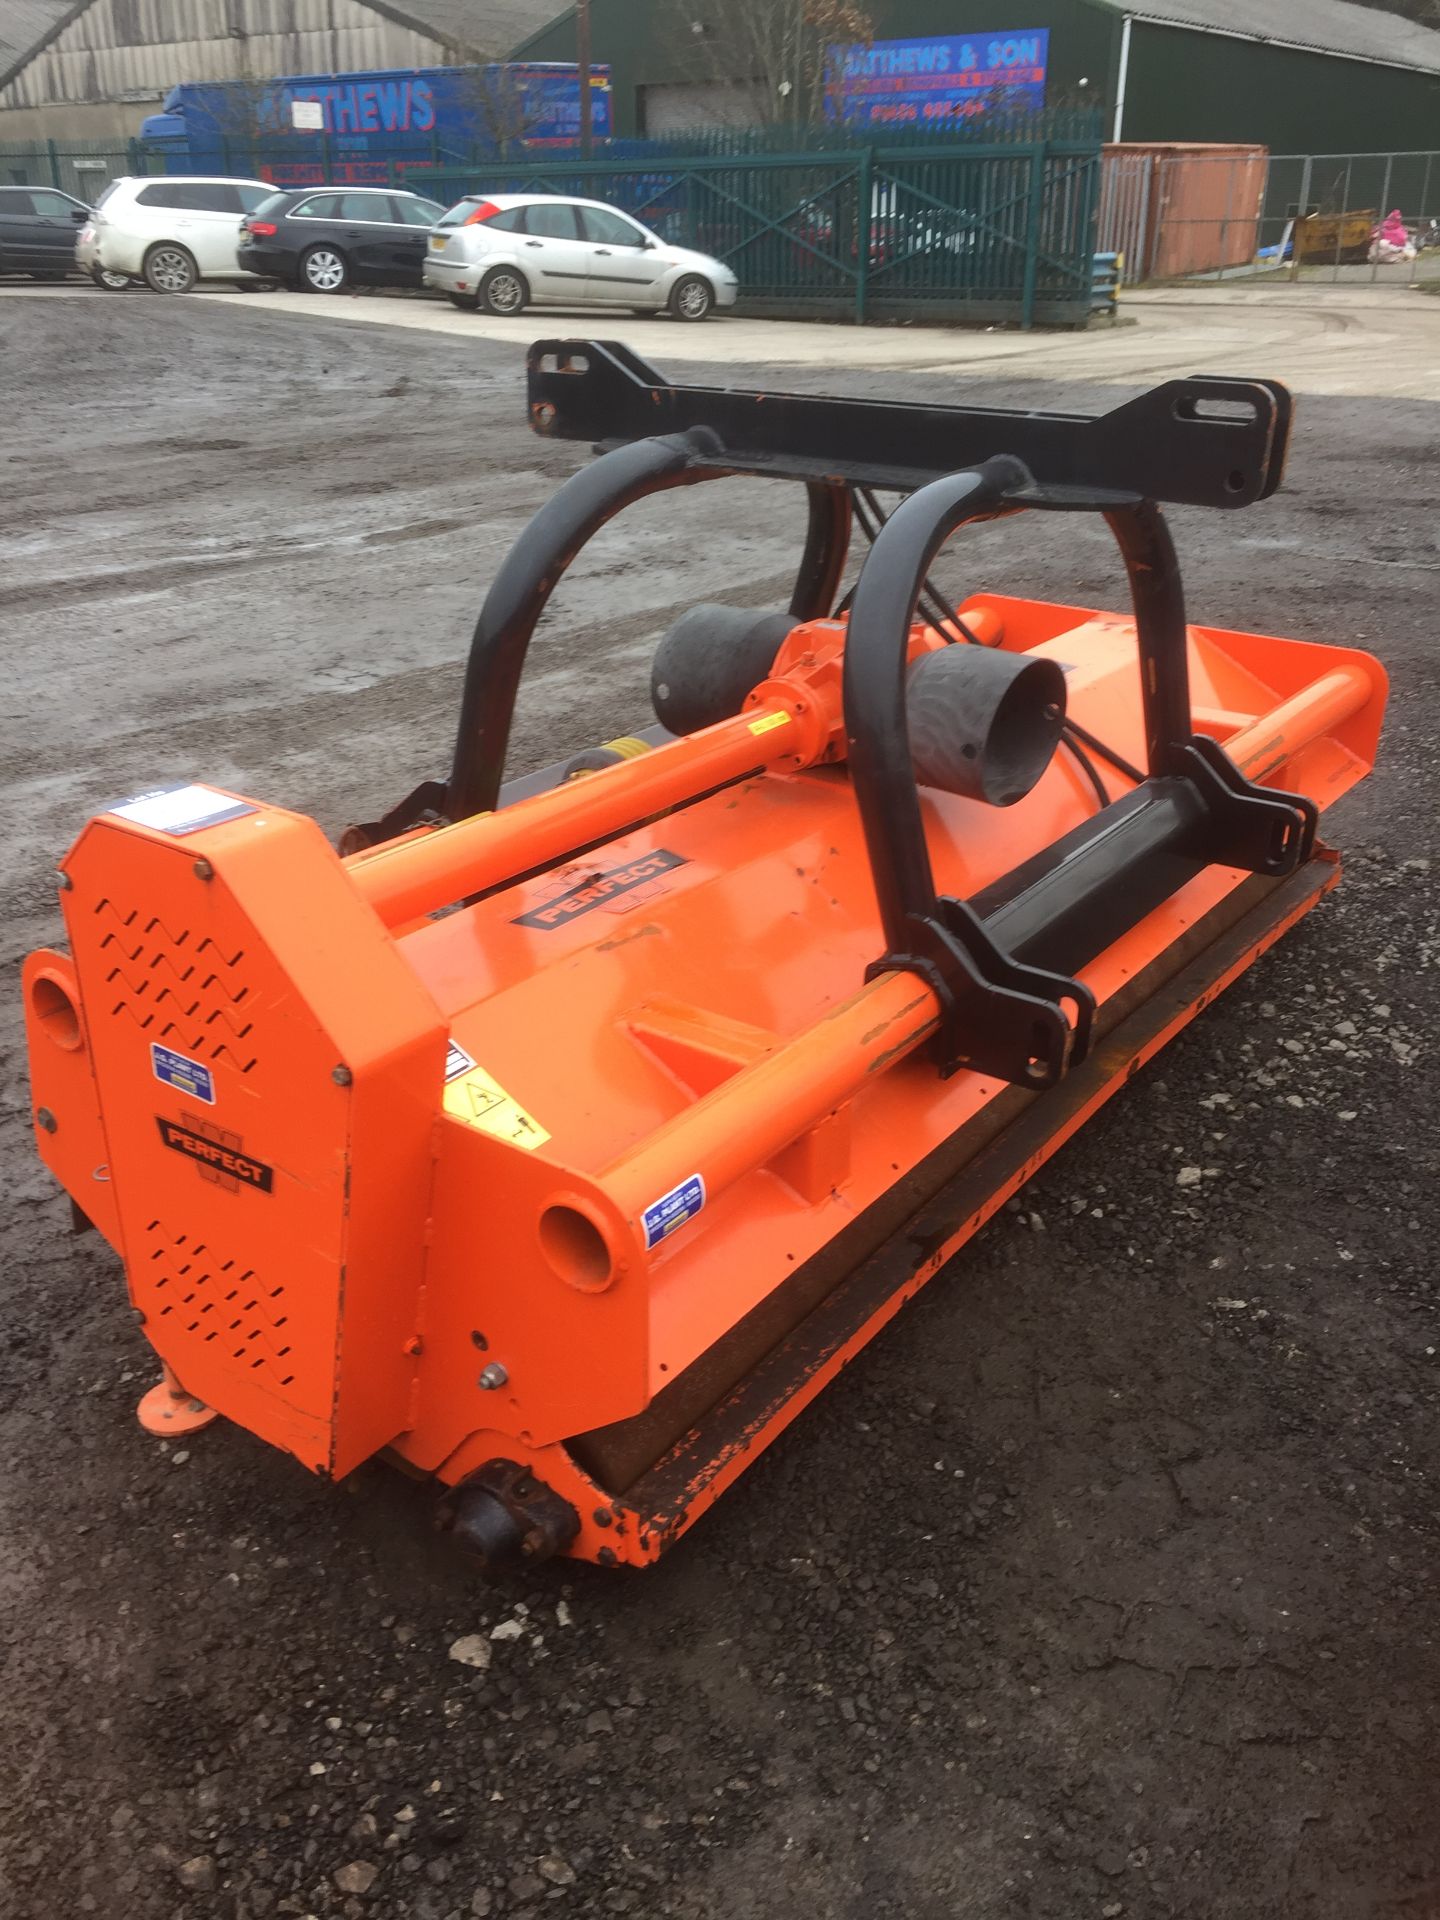 Perfect KR 245 flail mower, Serial No. 75716-PL